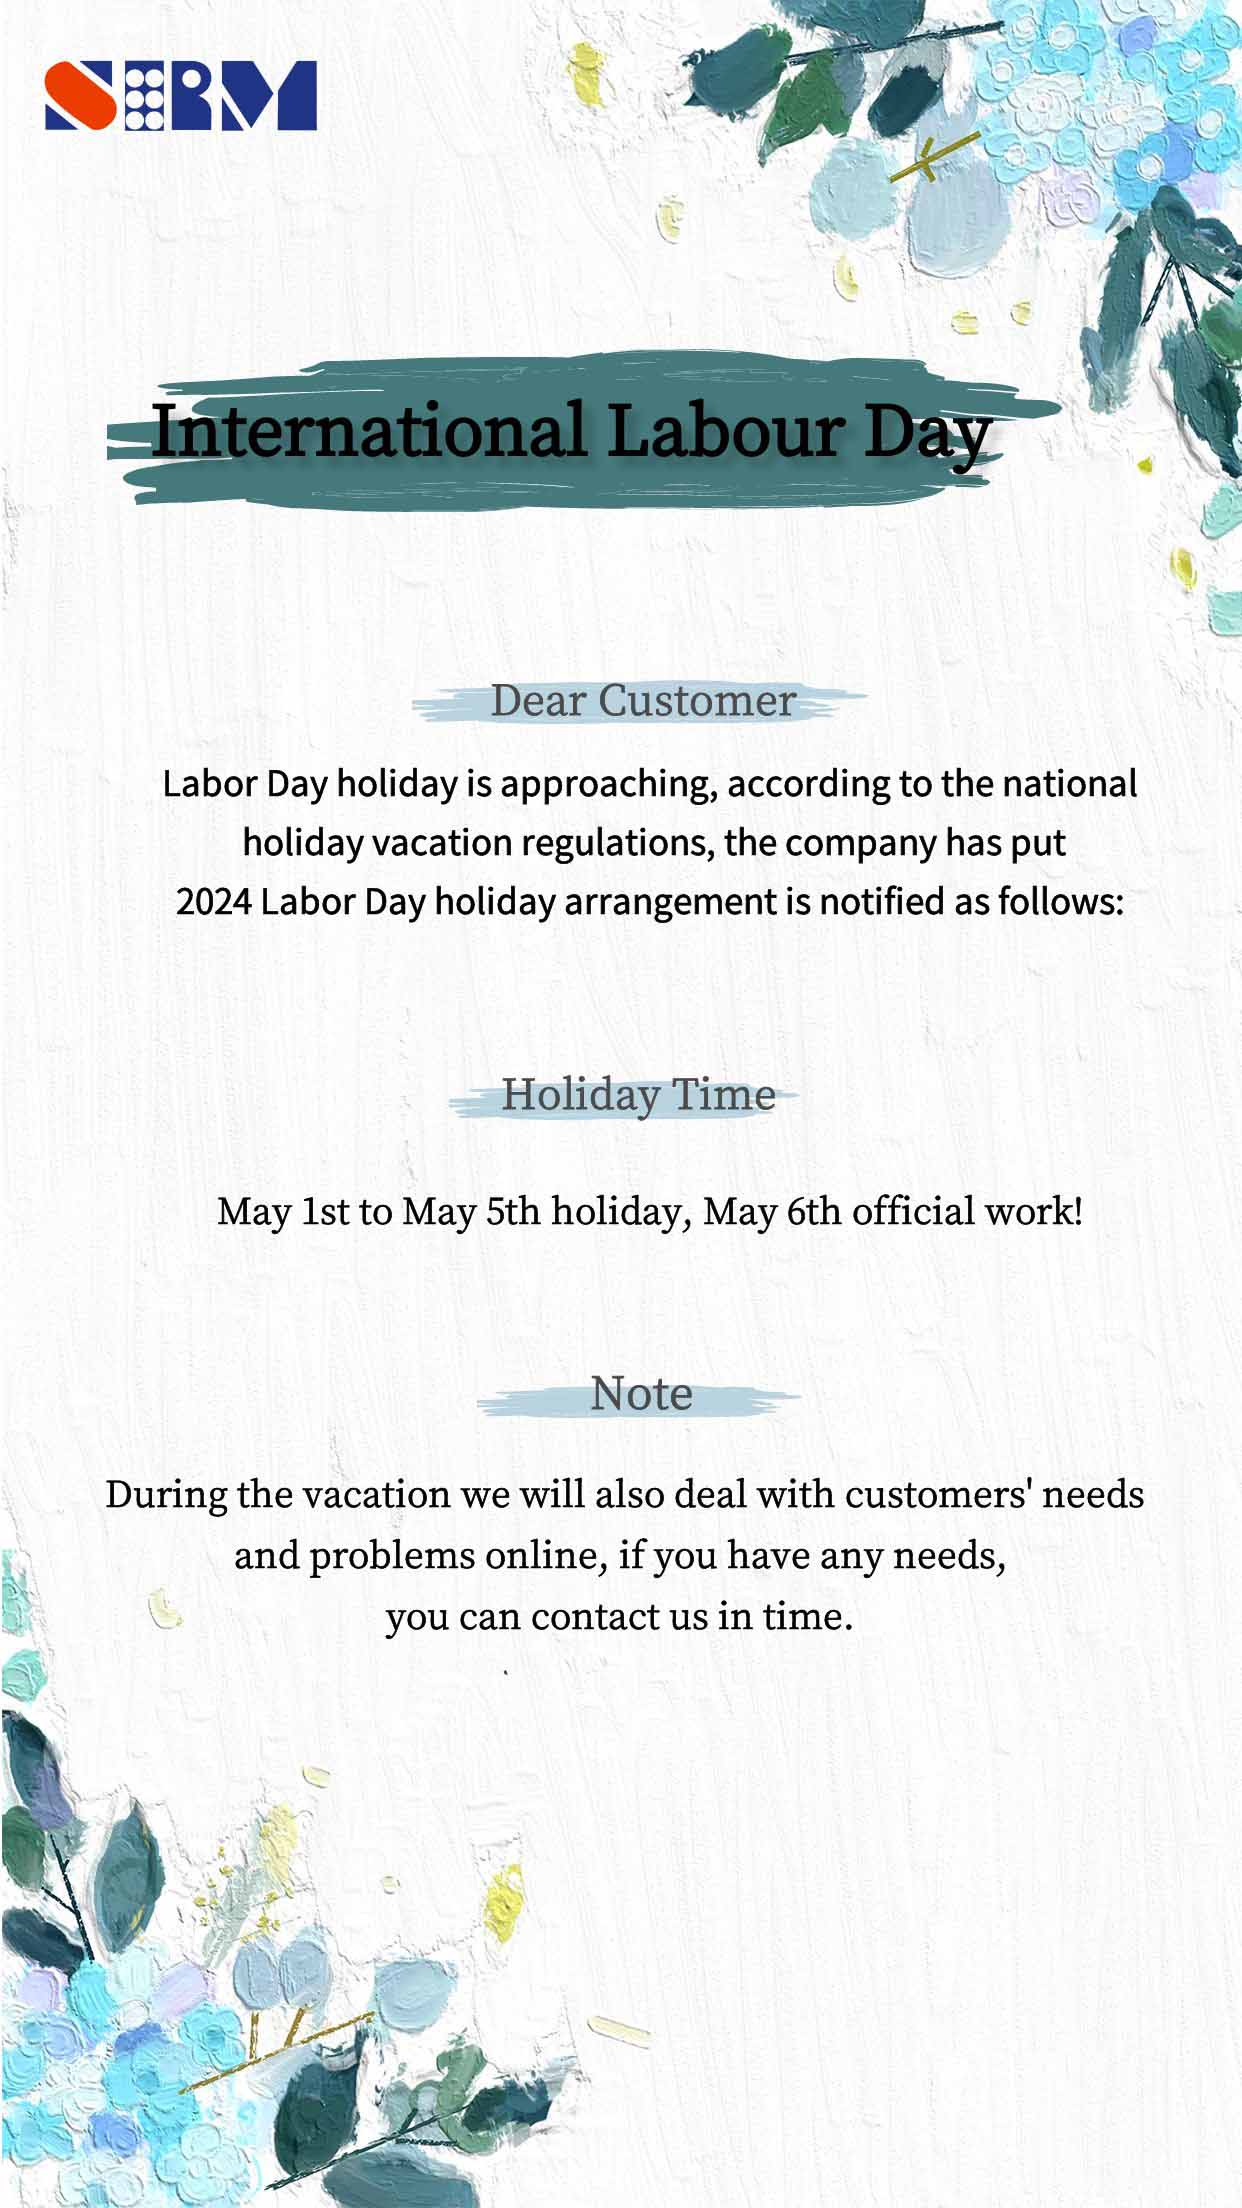 Labor Day Holiday is coming